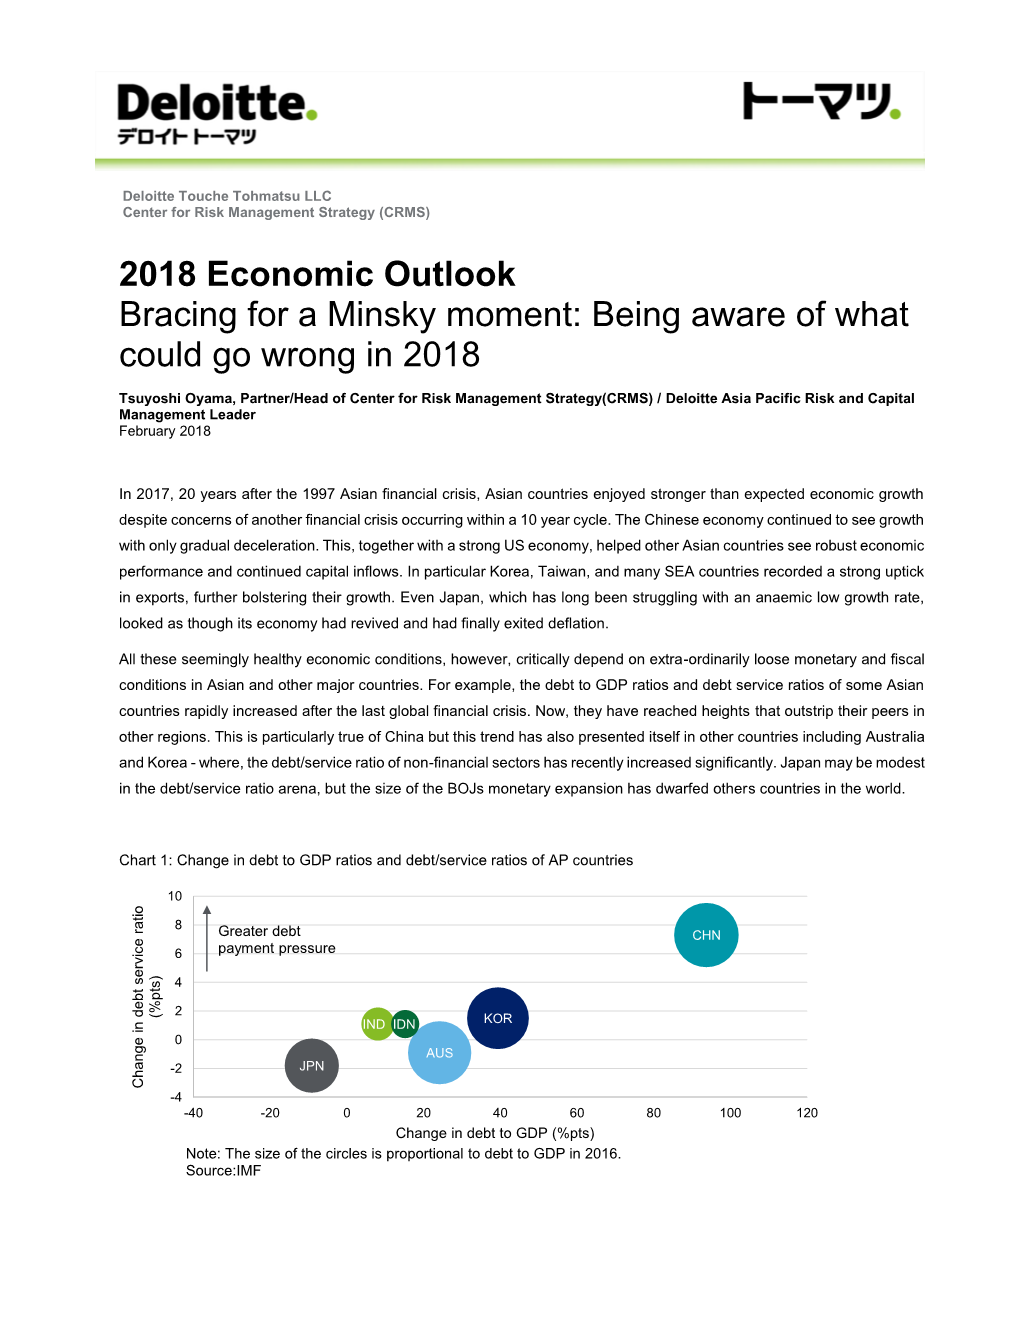 2018 Economic Outlook Bracing for a Minsky Moment: Being Aware of What Could Go Wrong in 2018